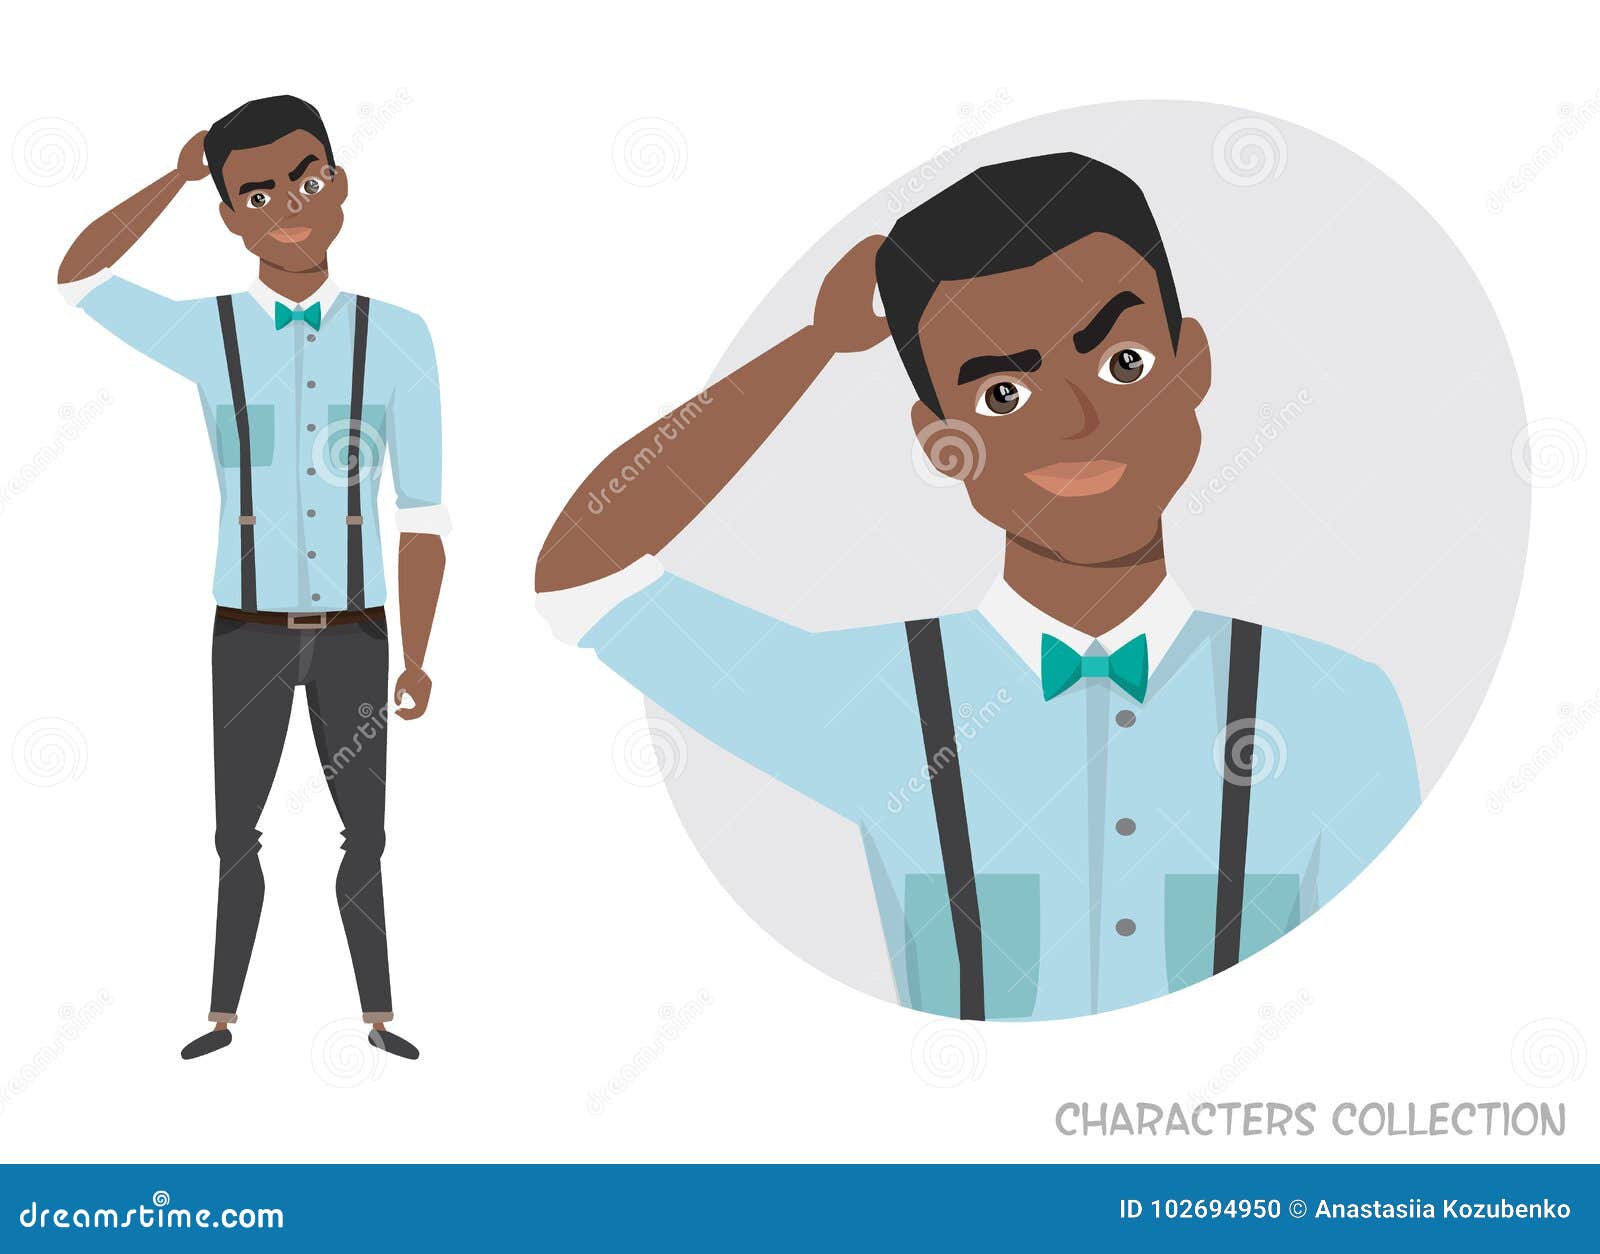 The Black African American Man Is Pensive Thinking Stock Vector Illustration Of Face